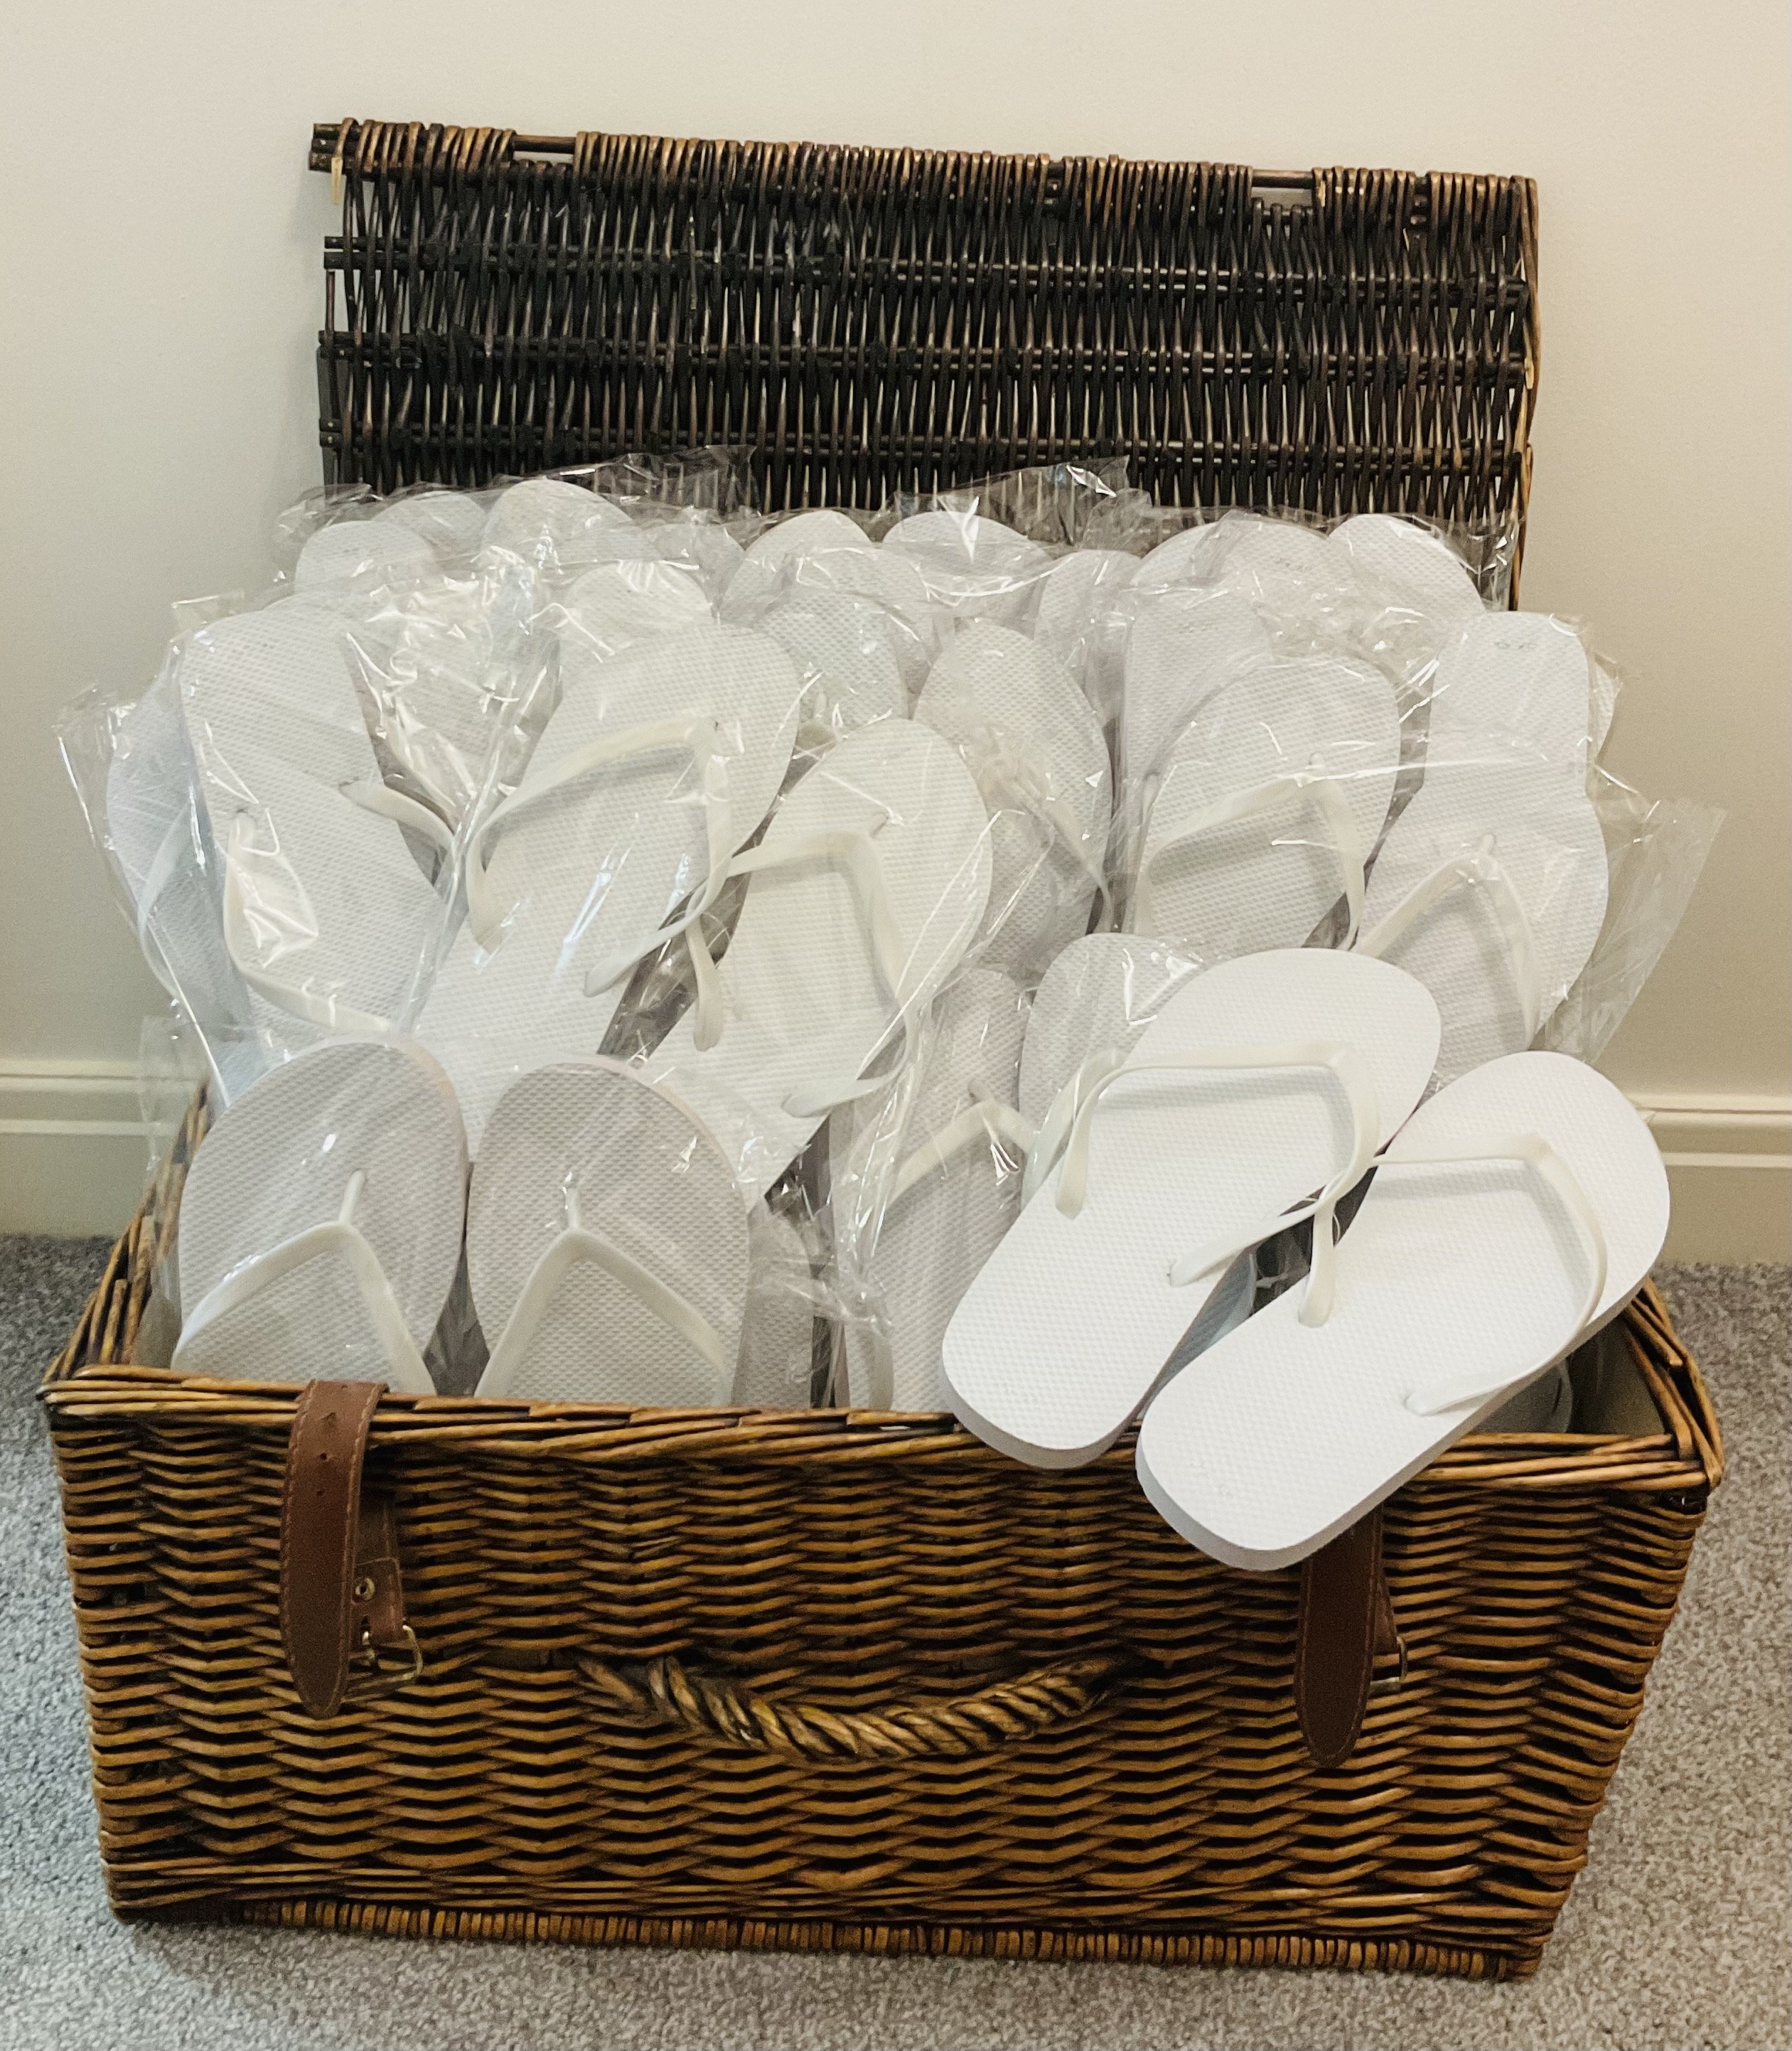 10, 20 or 30 Pairs of White Wedding Flip Flops for Wedding Guests Dancing  Feet Party Shoes Individually Bagged Bride Bridal 